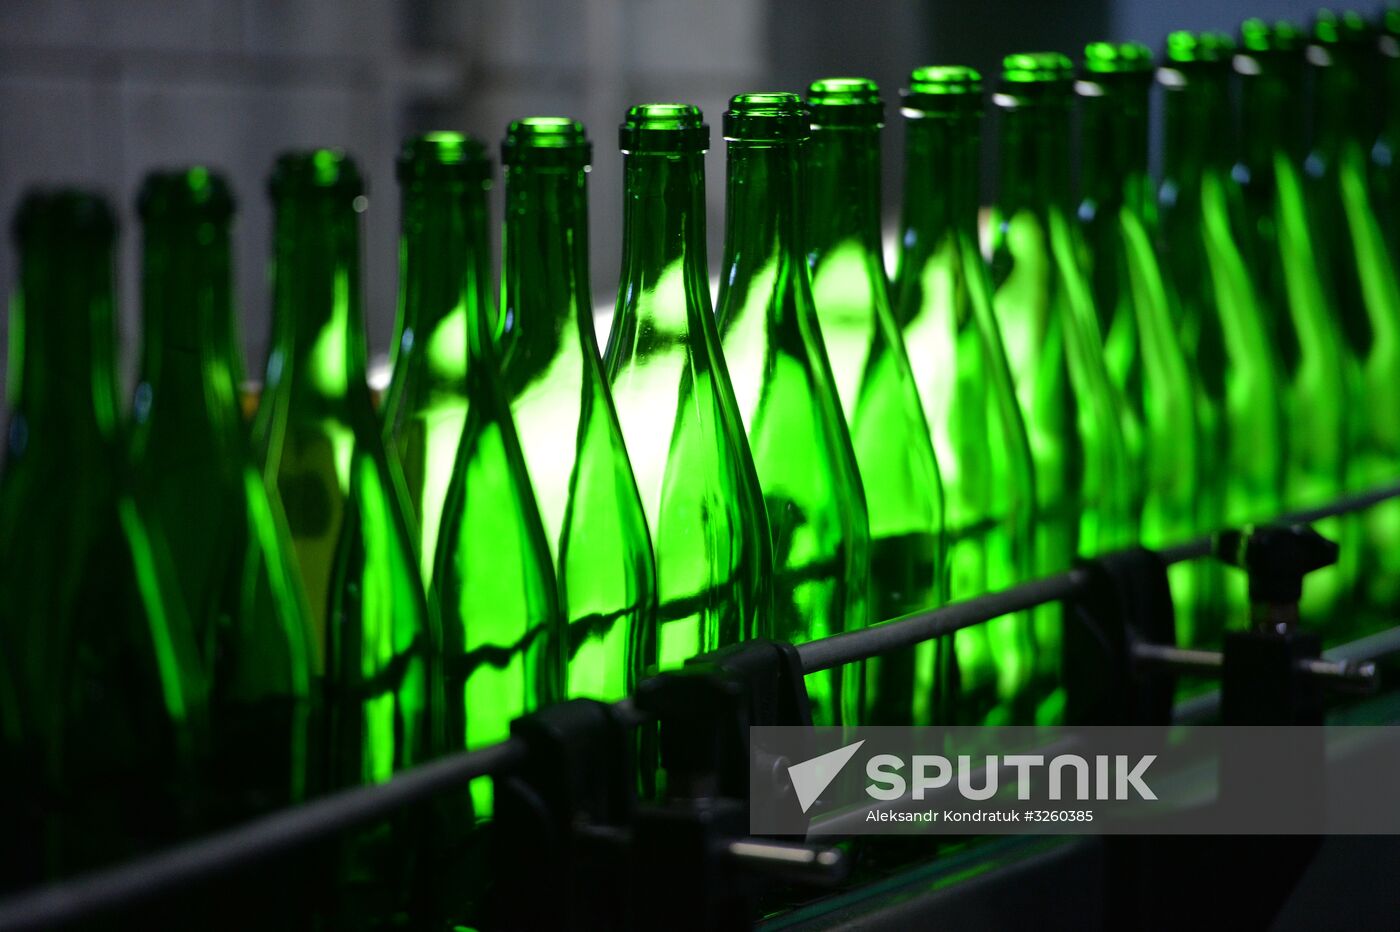 Prooduction of champagne in Chelyabinsk